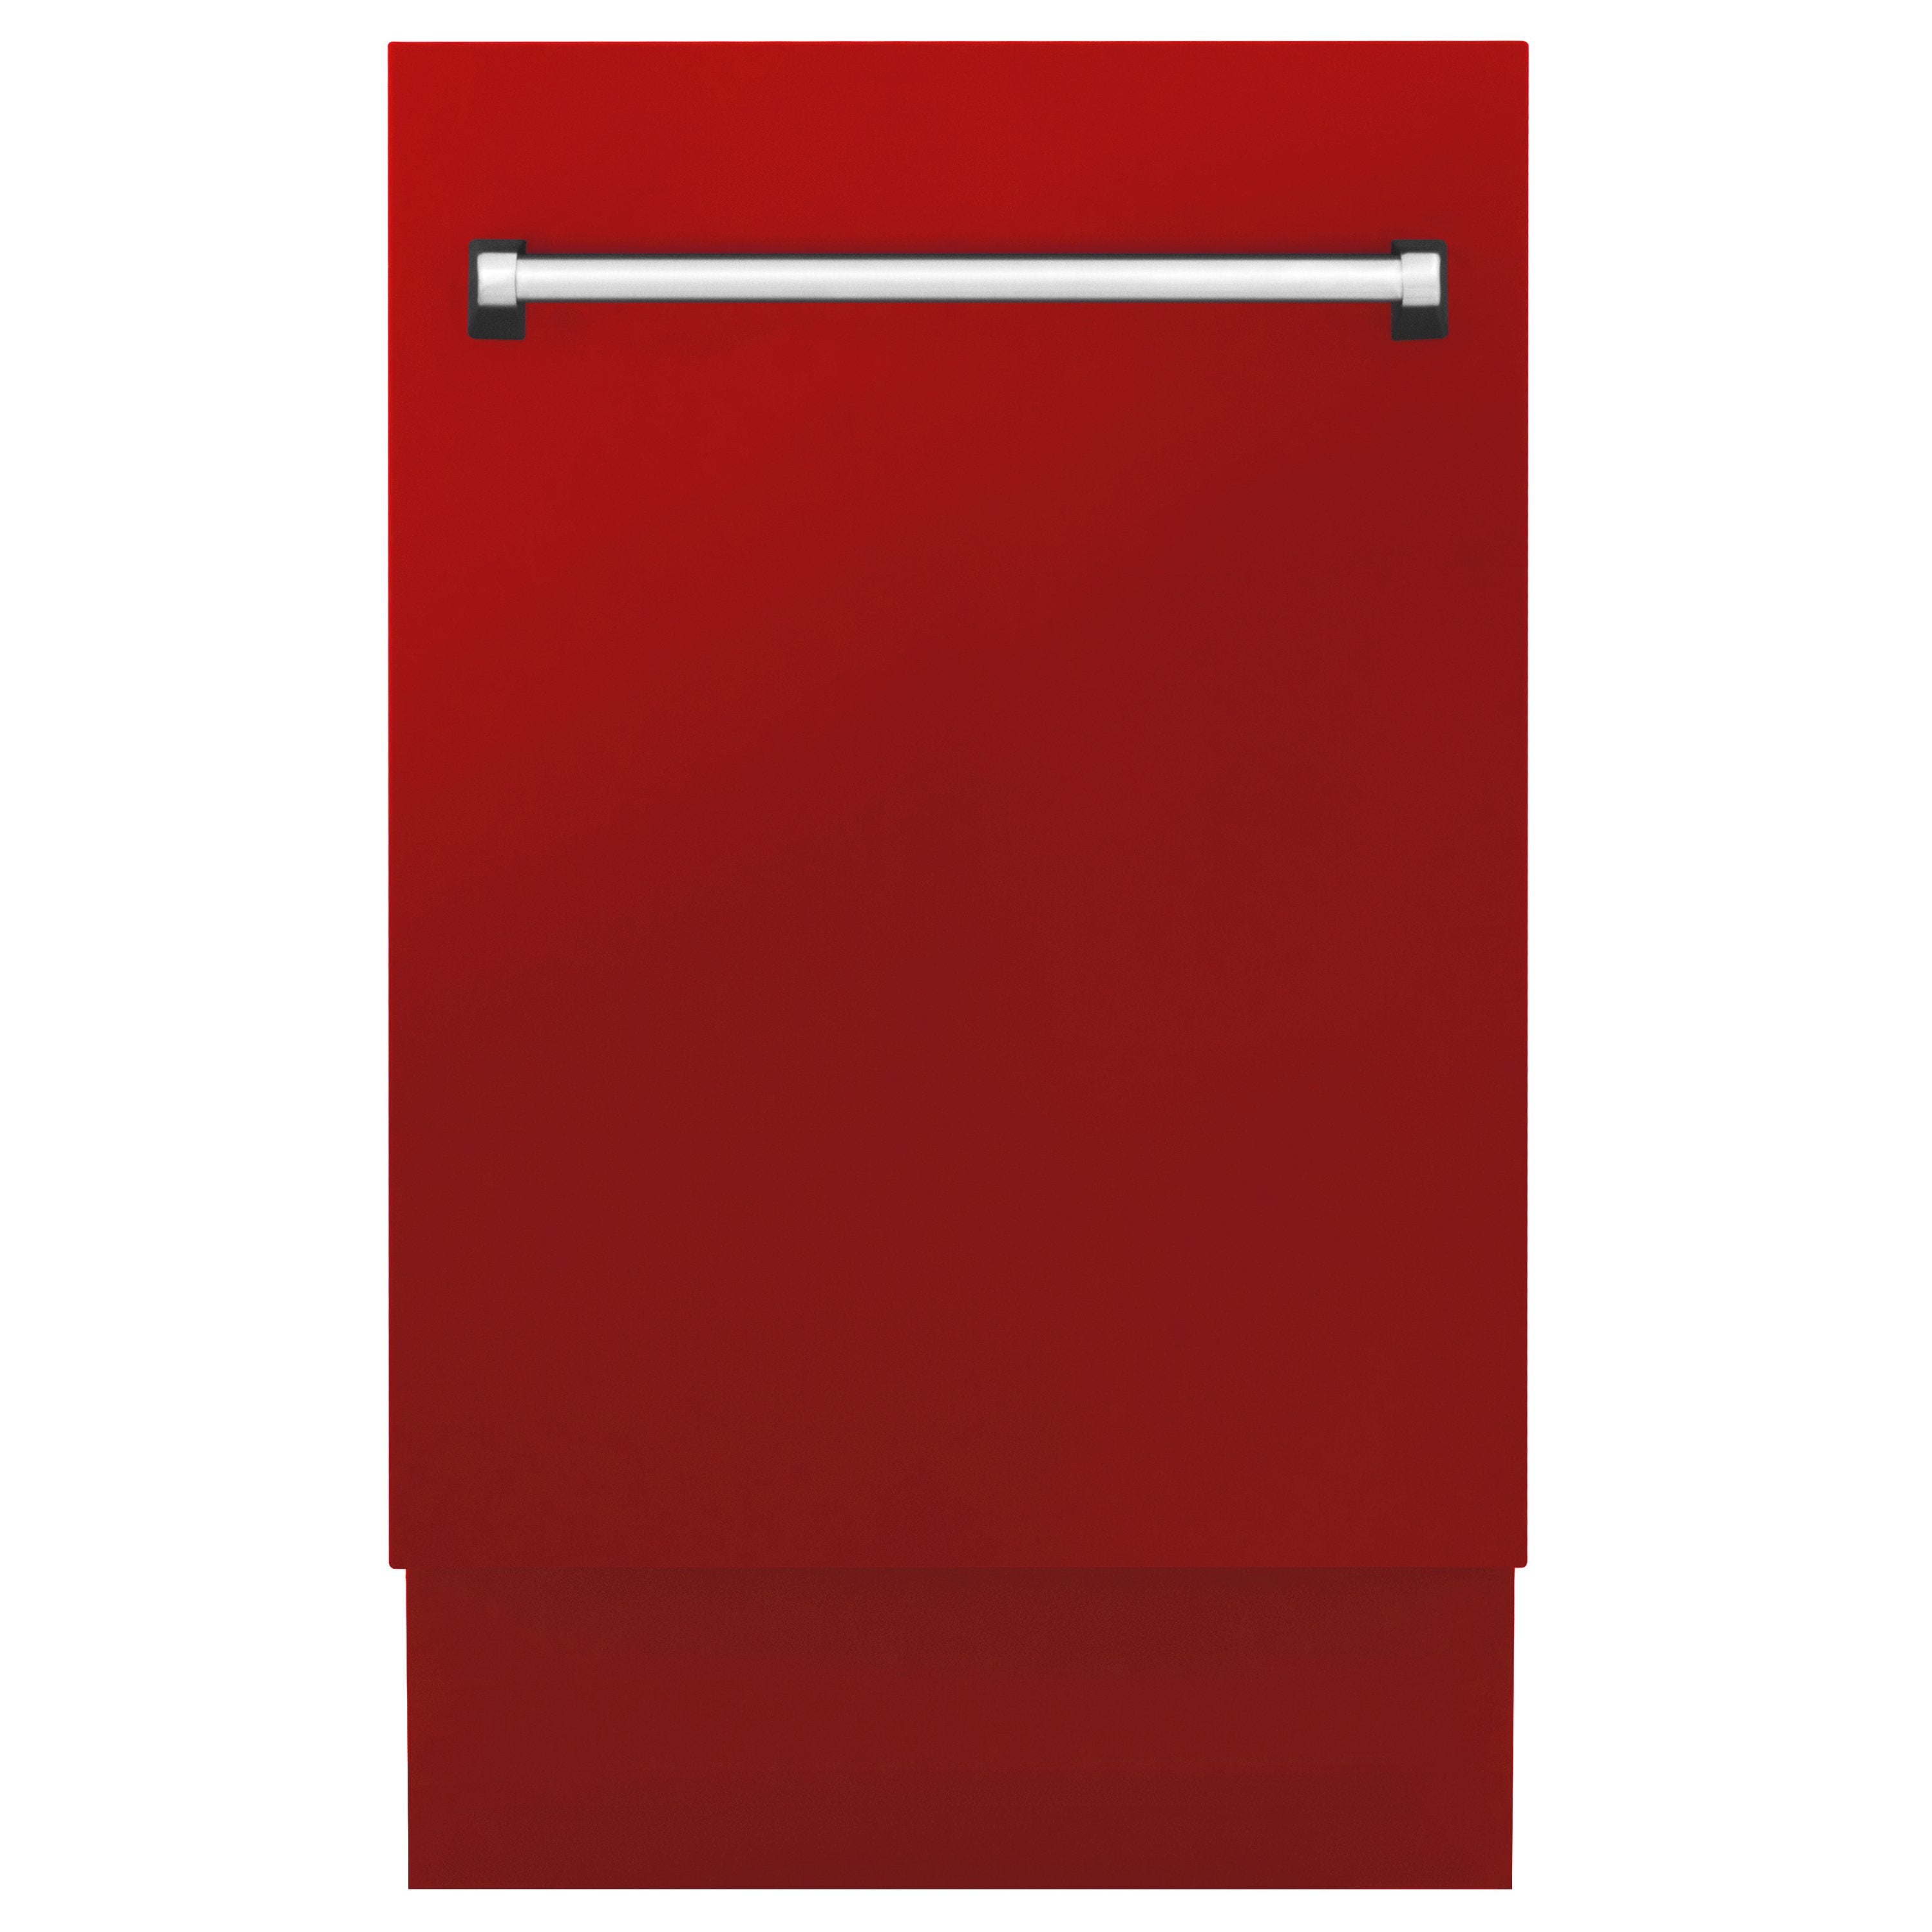 ZLINE 18 in. Top Control Tall Dishwasher in Red Matte with 3rd Rack 1